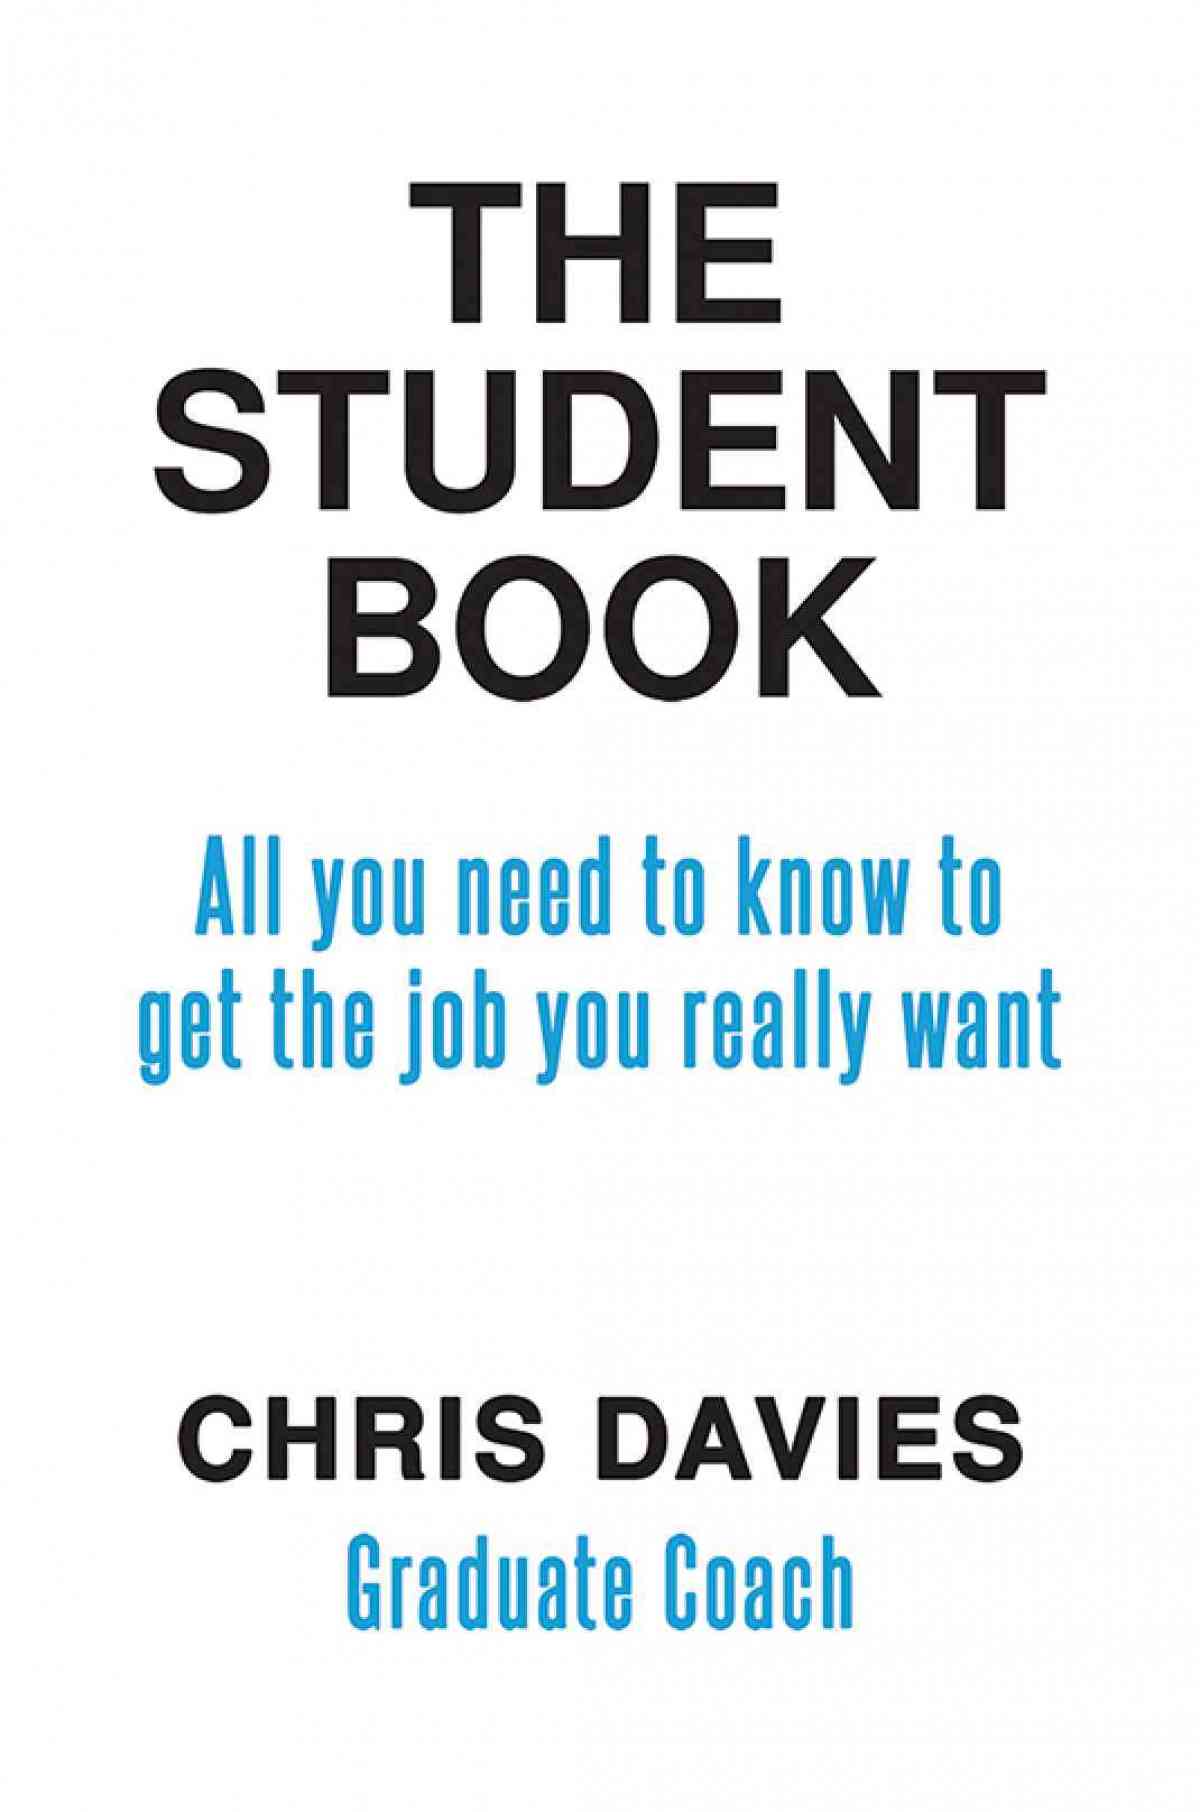 Chris-Davies-of-the-graduate-book-and-the-student-book-featured-in-a-youtube-video